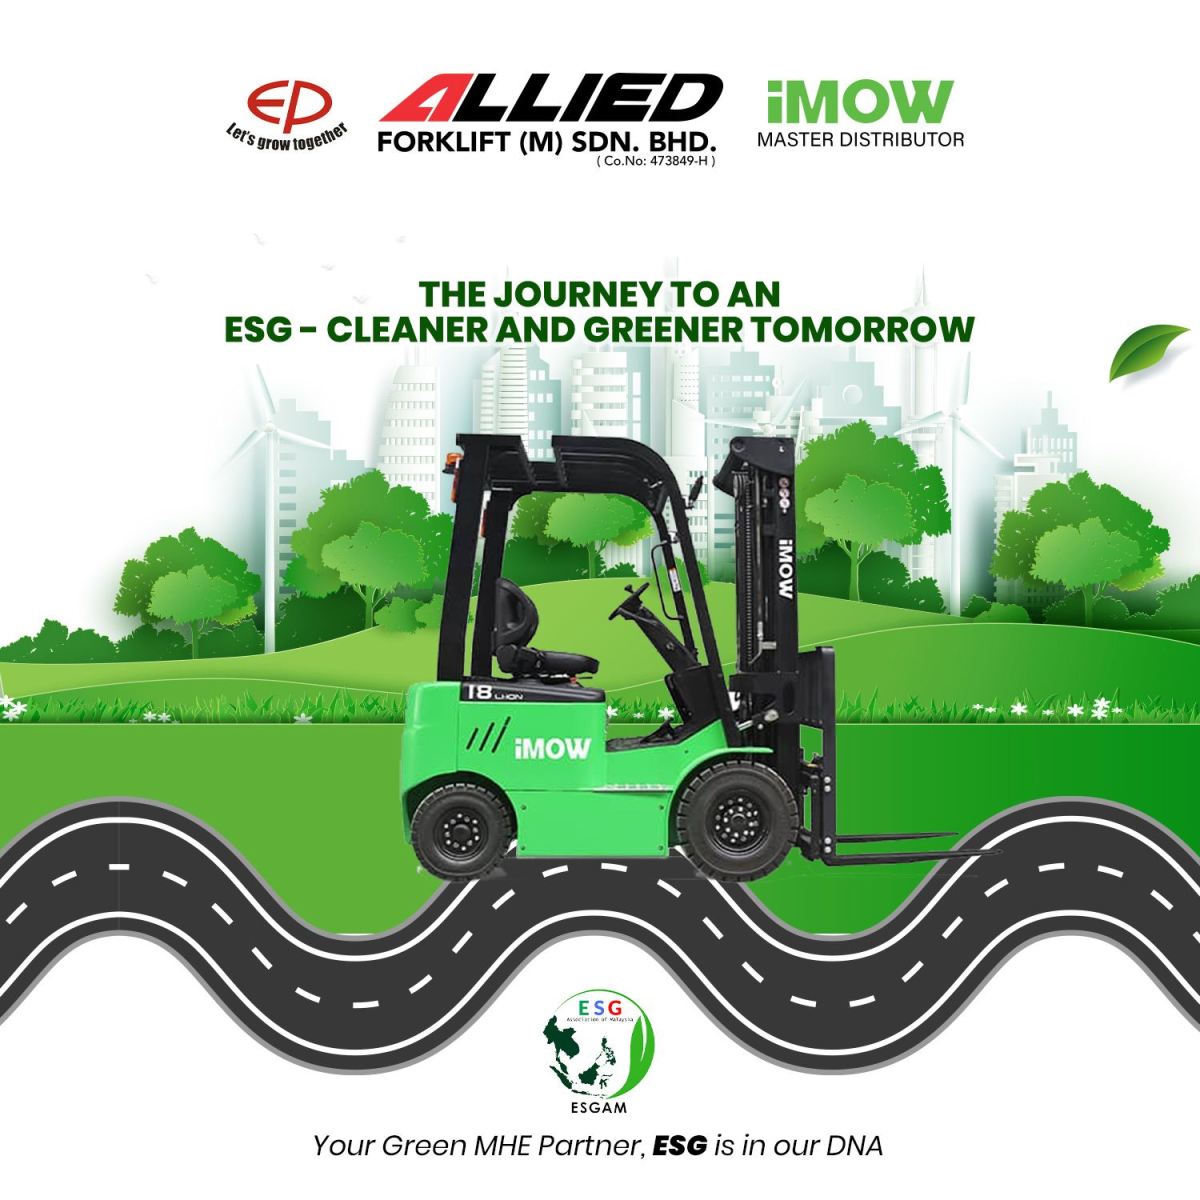 Allied Forklift's Journey to an ESG - Cleaner and Greener Tomorrow: Smiles of Faith & Trust�